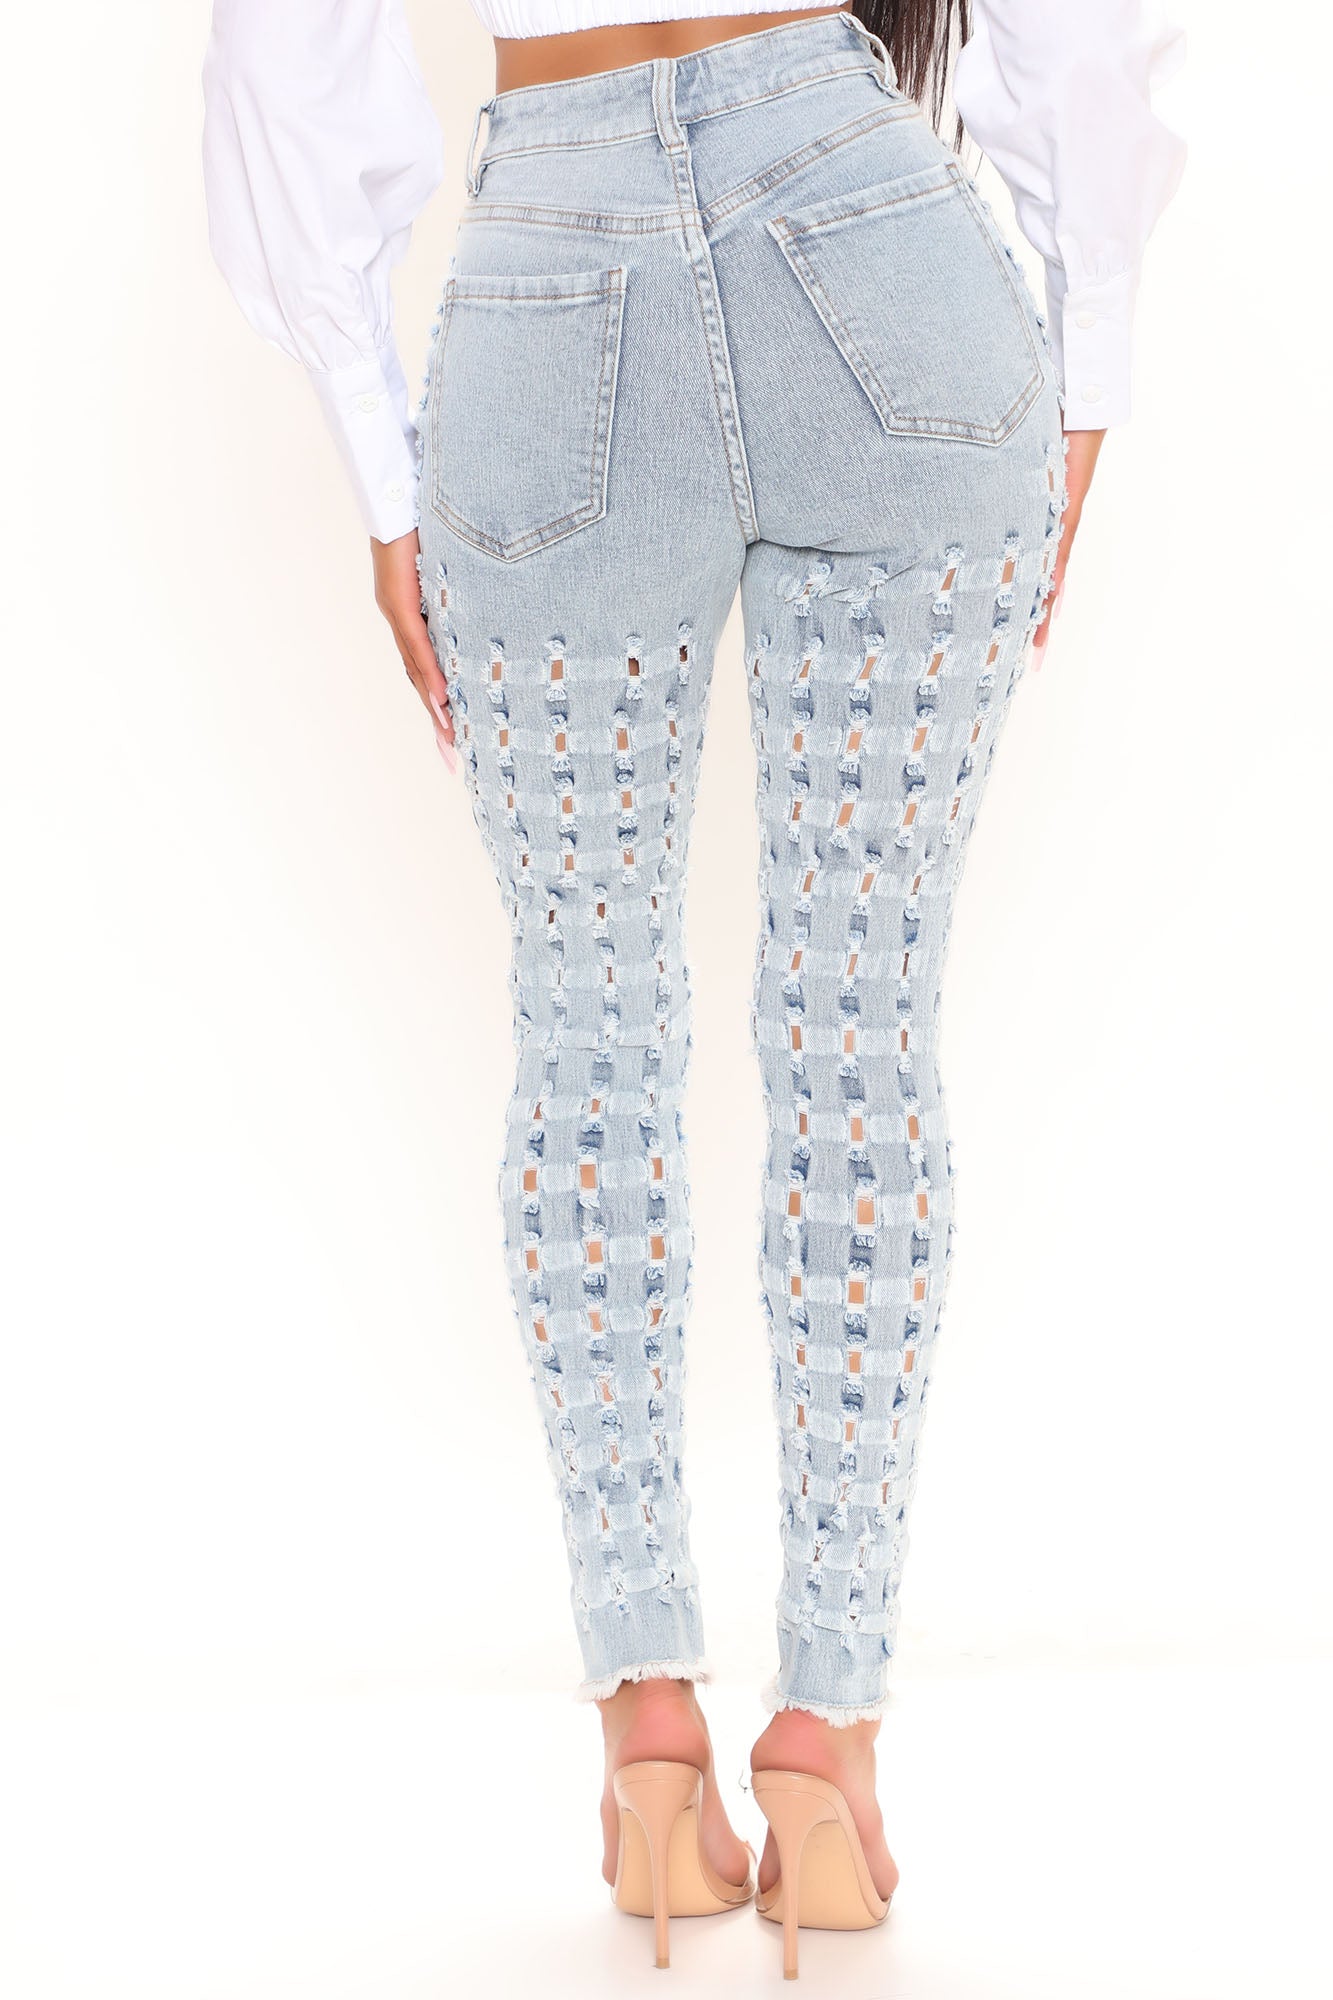 All The Feels Stretch Skinny Jeans - Light Blue Wash